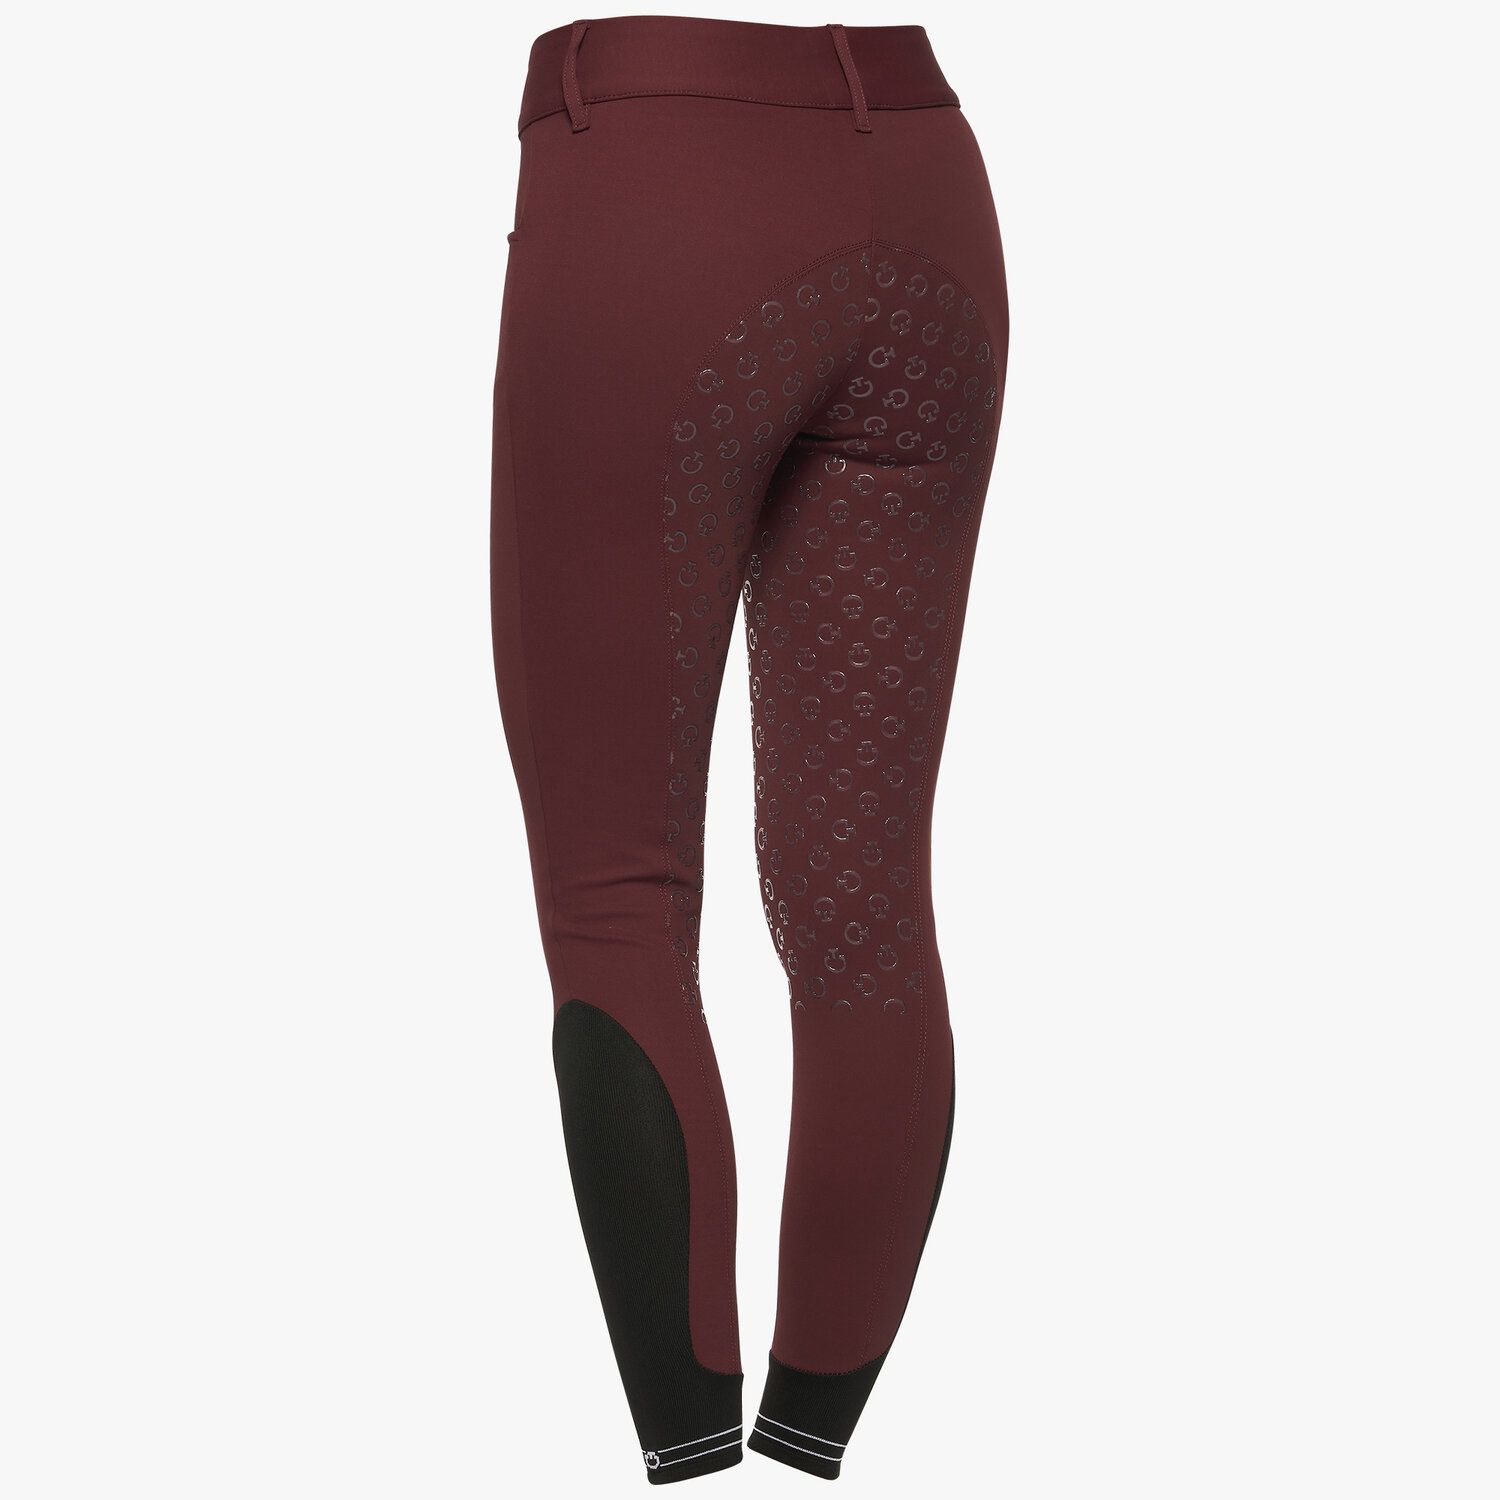 Cavalleria Toscana Women's dressage breeches with perforated logo tape BORDEAUX-3